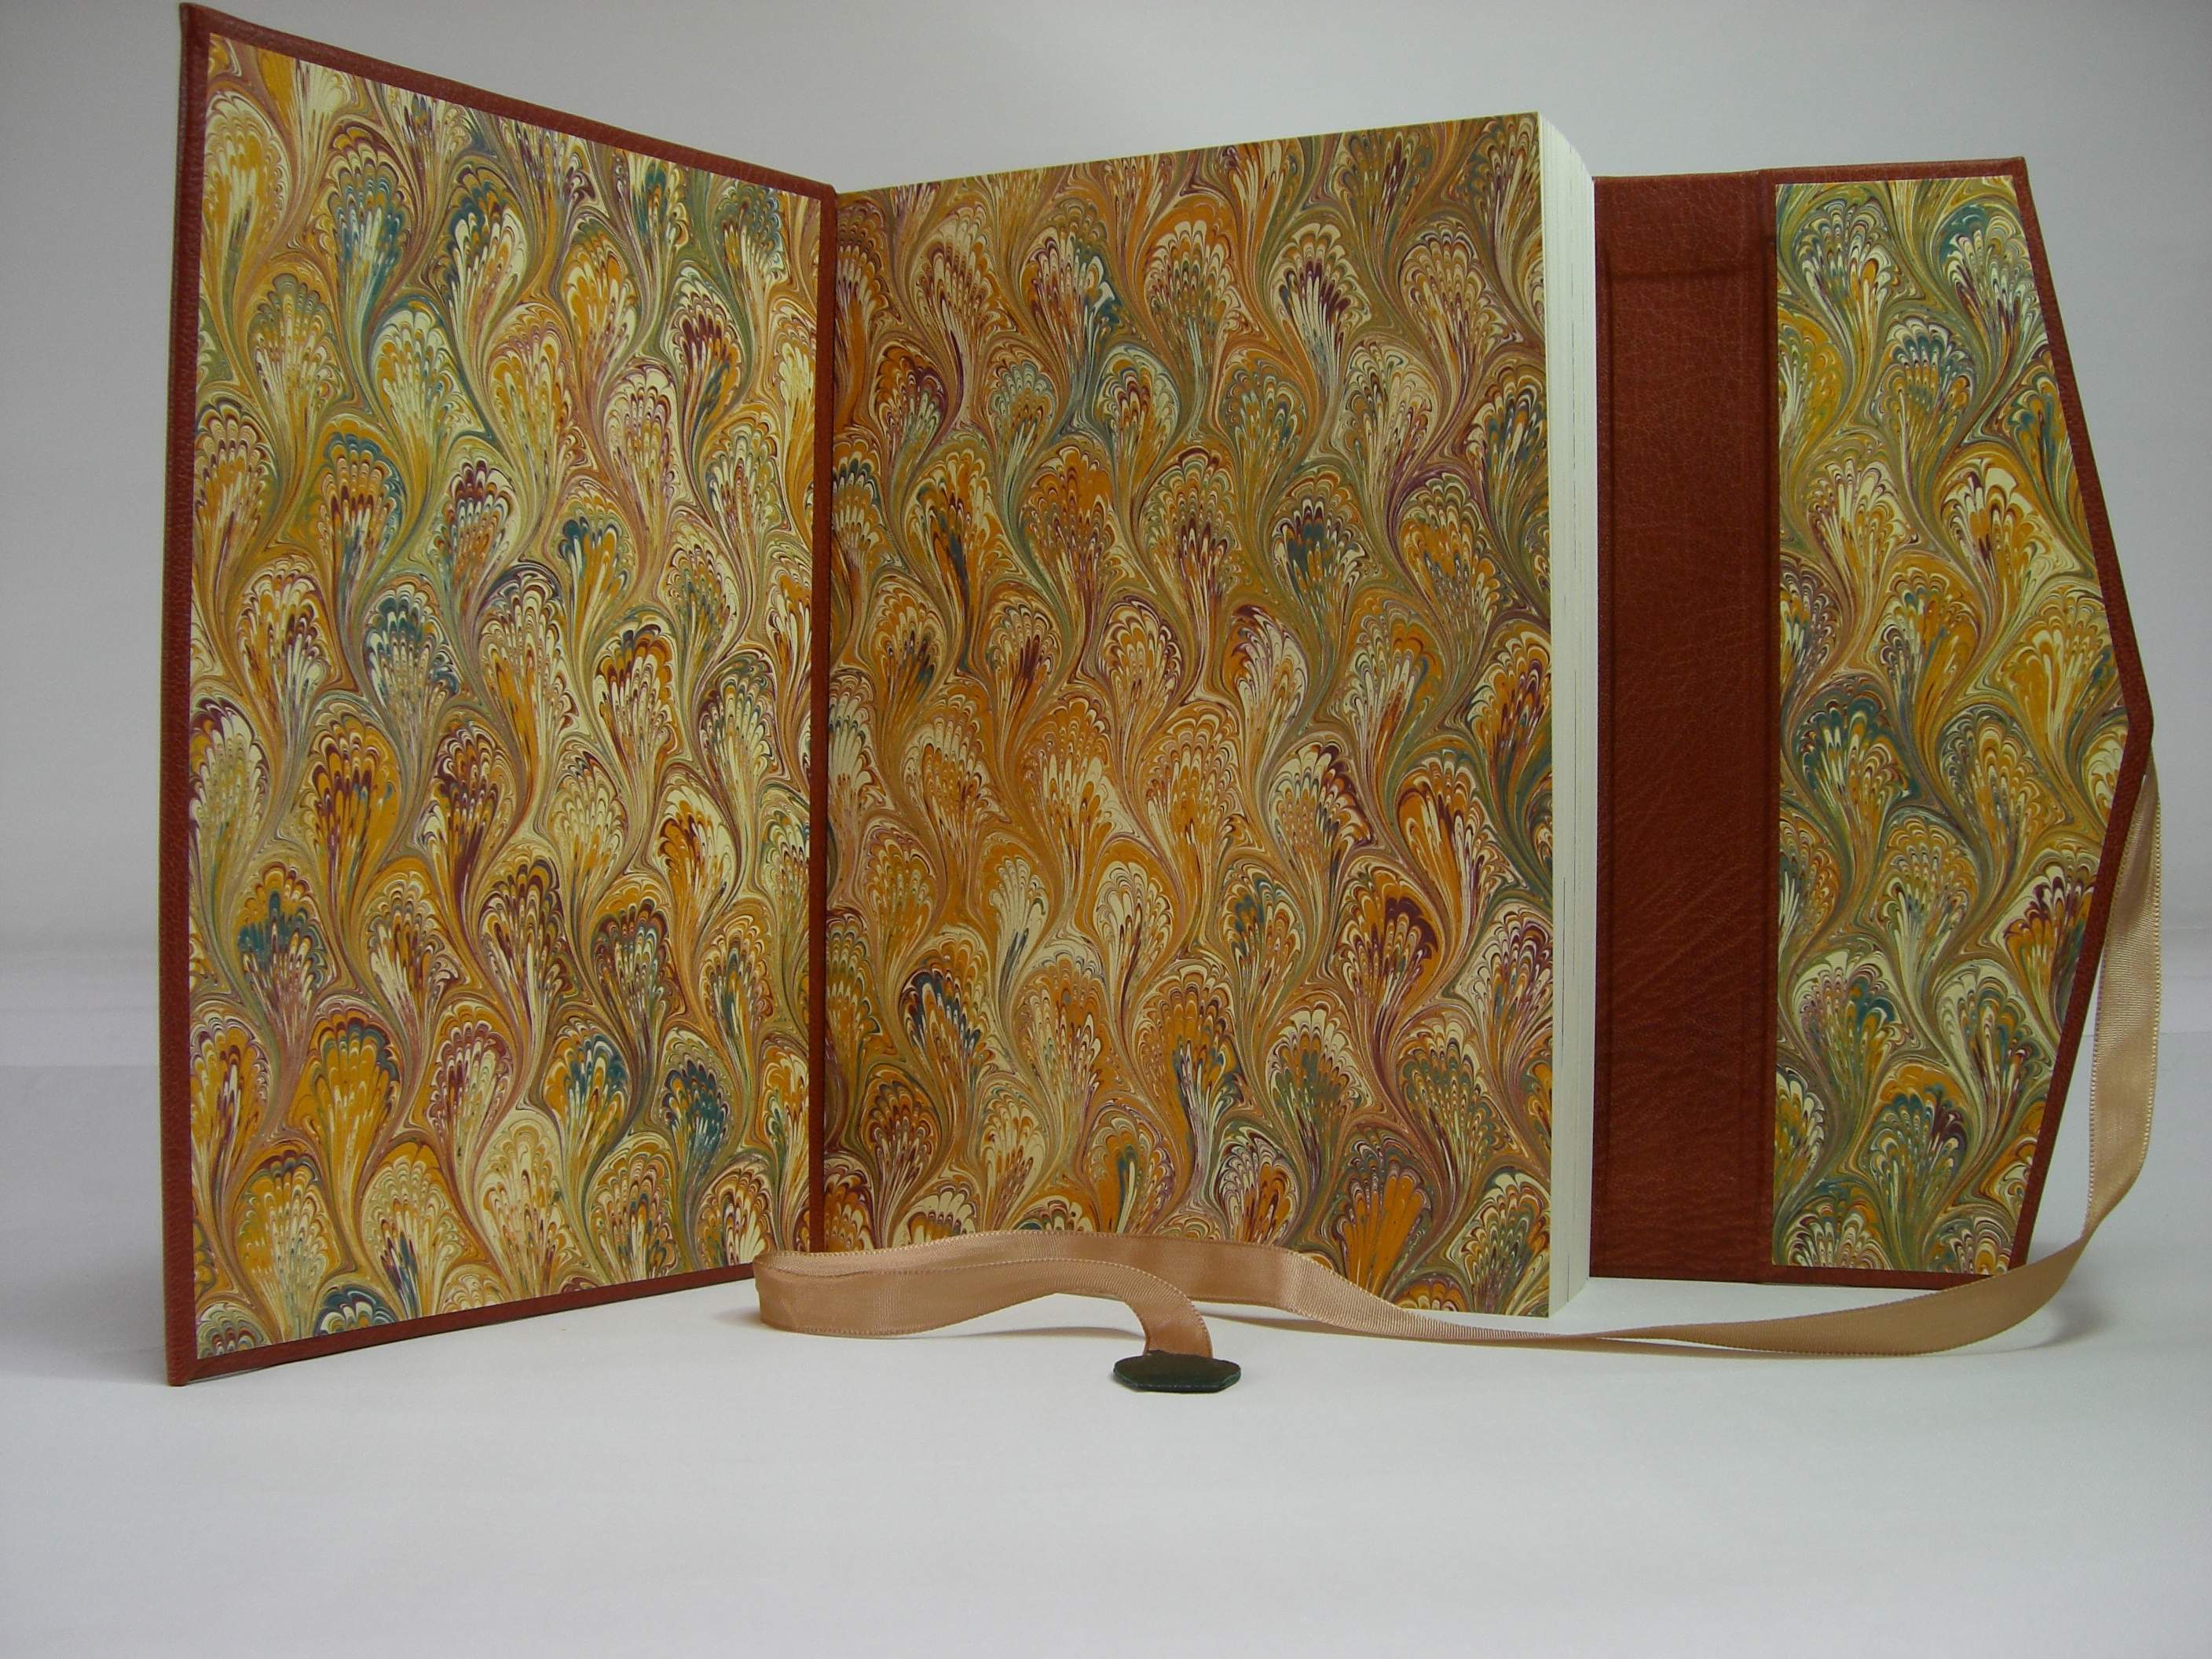 Marbled endpapers and flap detail